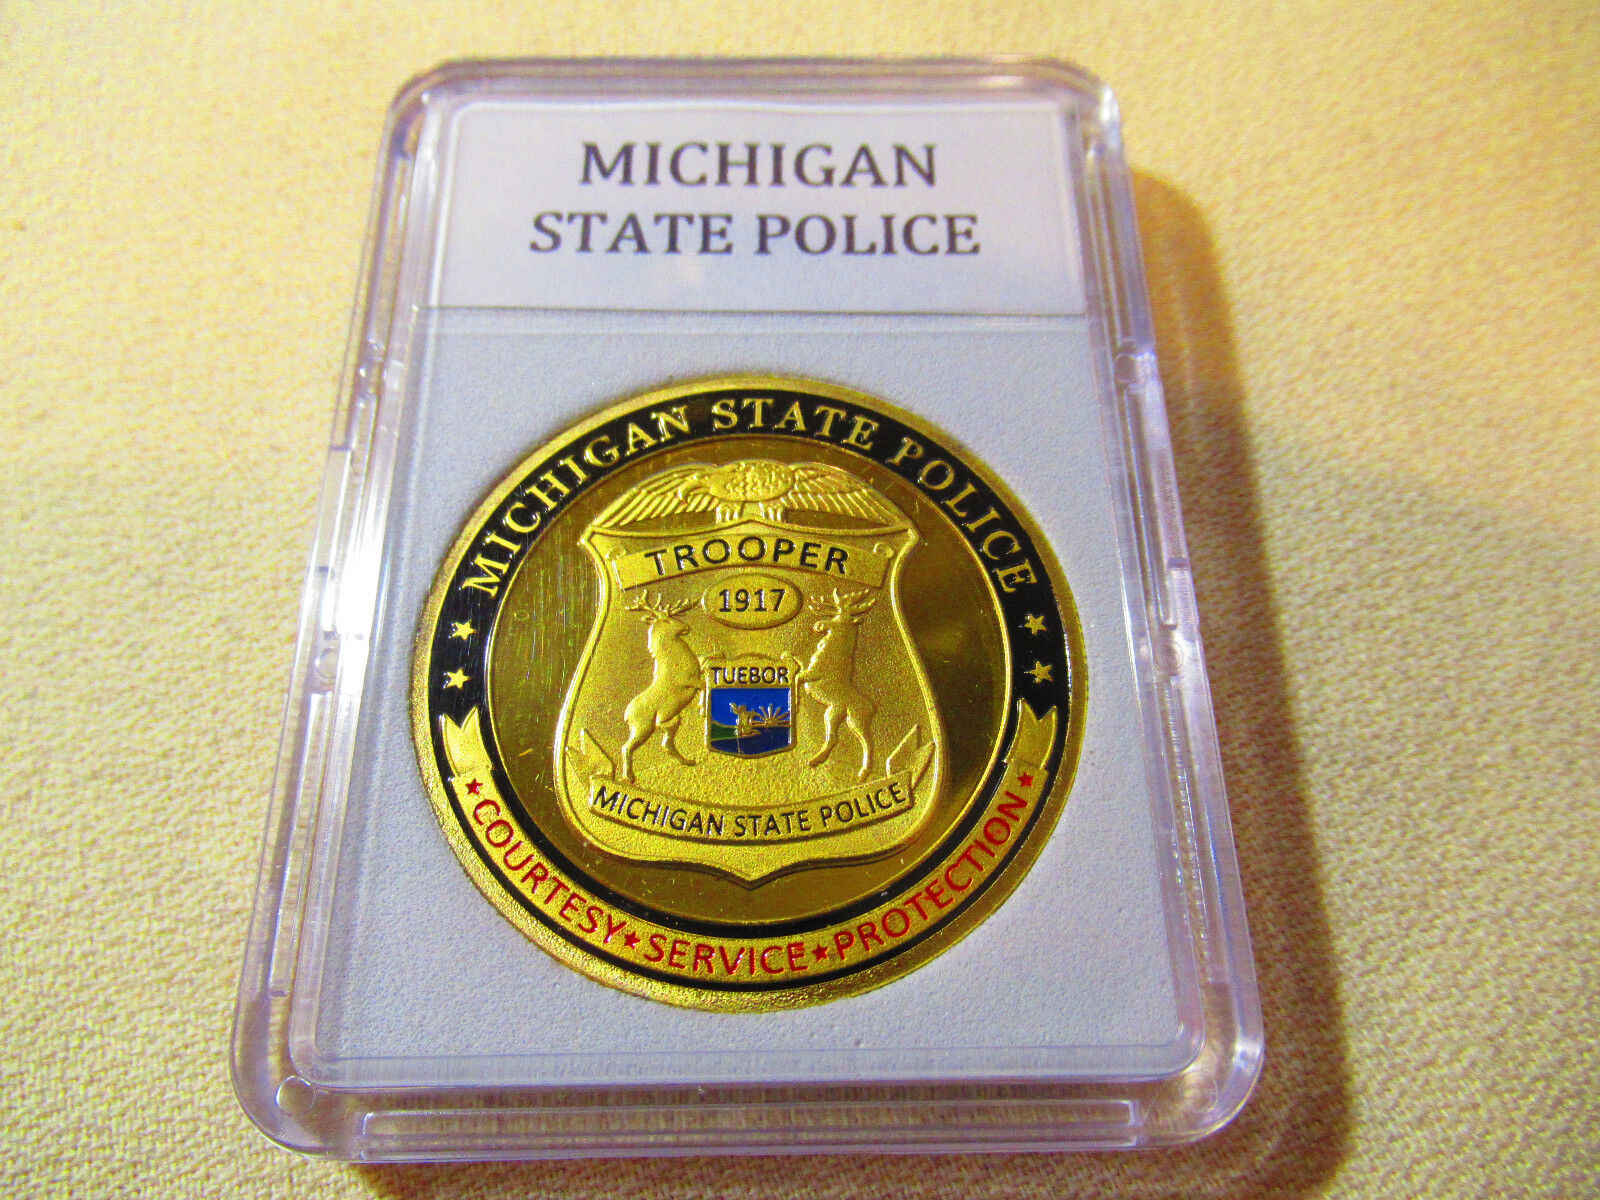 MICHIGAN STATE POLICE Challenge Coin 